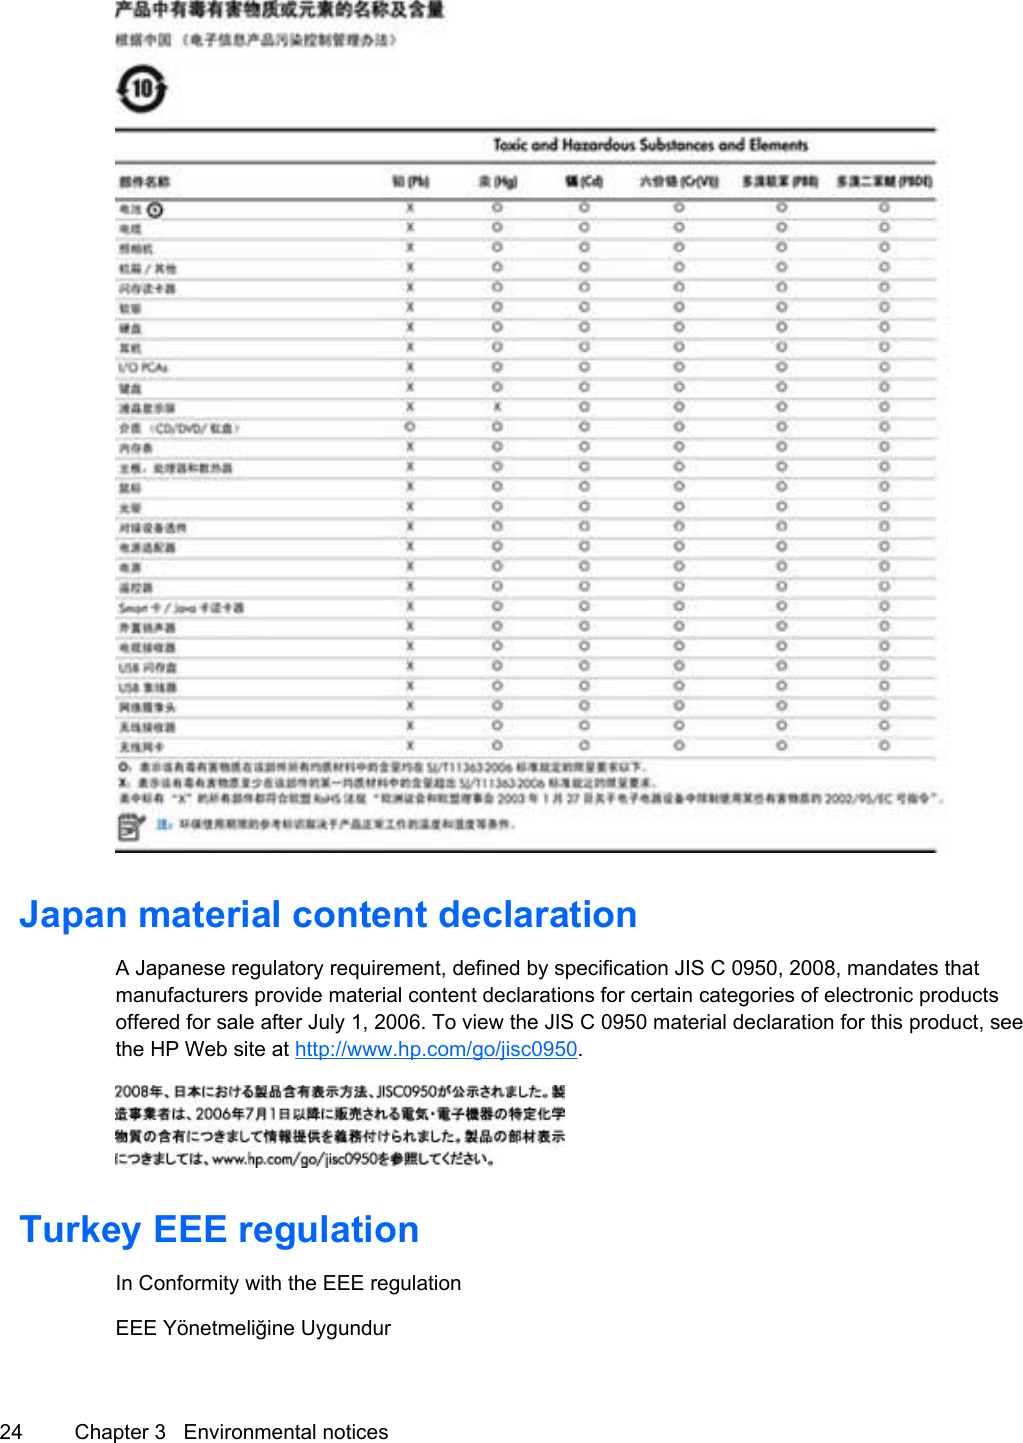 Japan material content declarationA Japanese regulatory requirement, defined by specification JIS C 0950, 2008, mandates thatmanufacturers provide material content declarations for certain categories of electronic productsoffered for sale after July 1, 2006. To view the JIS C 0950 material declaration for this product, seethe HP Web site at http://www.hp.com/go/jisc0950.Turkey EEE regulationIn Conformity with the EEE regulationEEE Yönetmeliğine Uygundur24 Chapter 3   Environmental notices